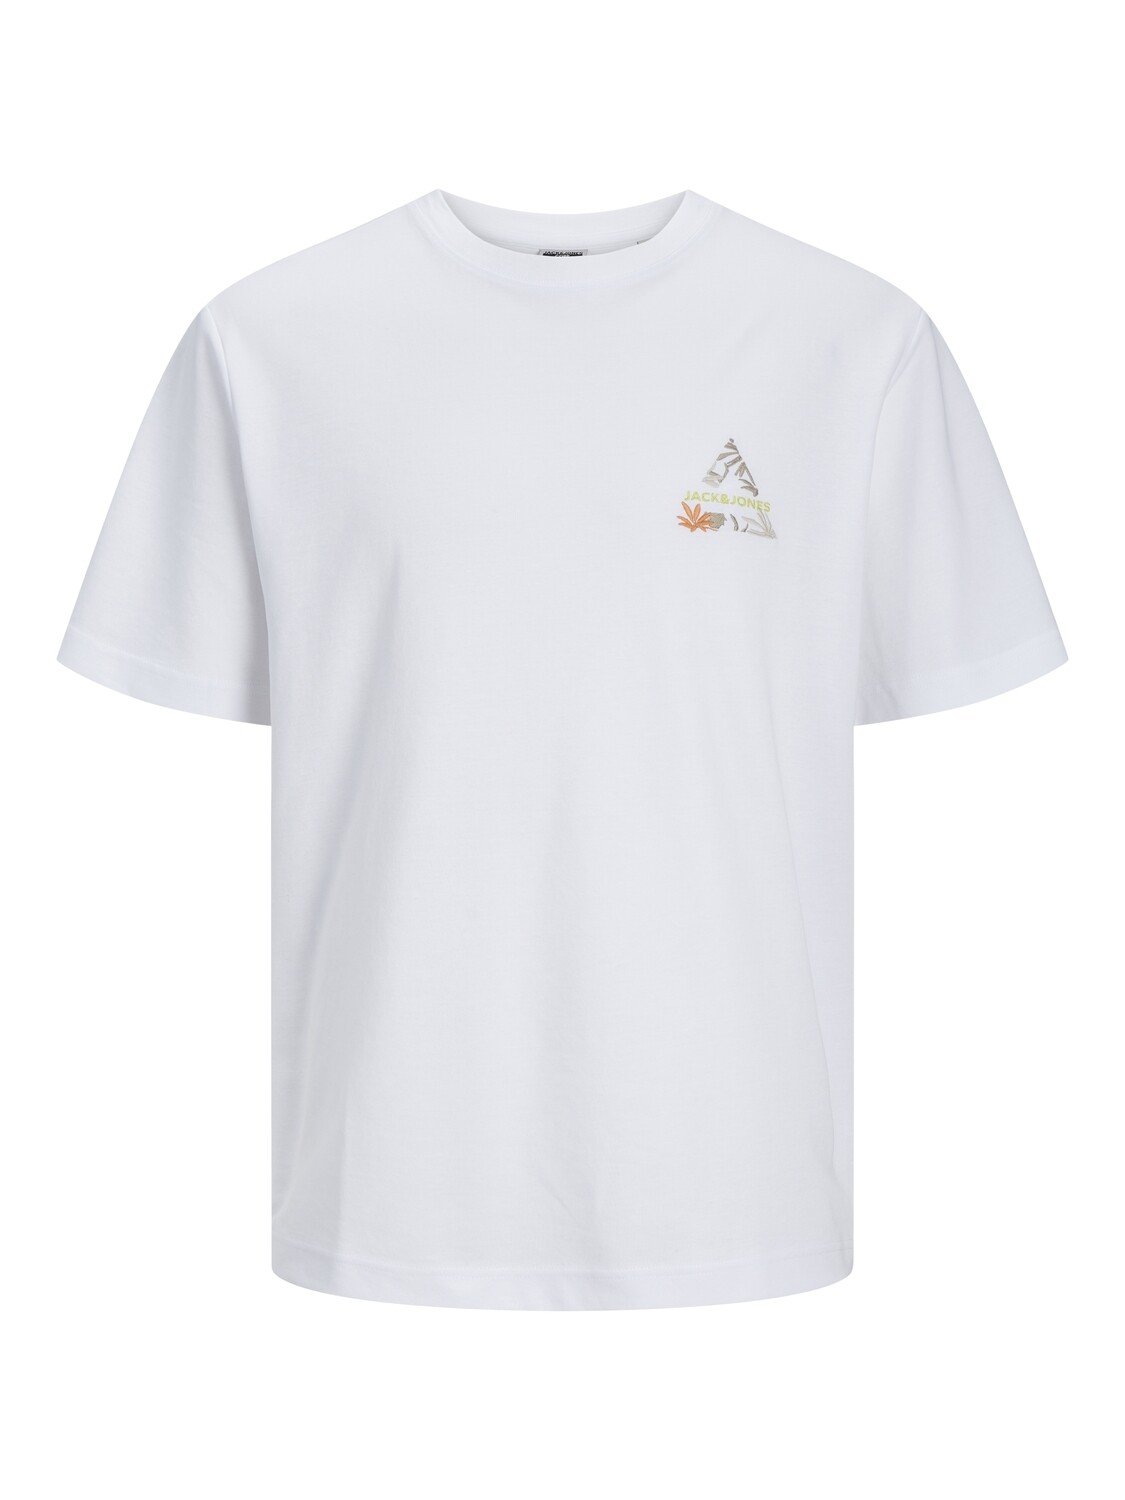 JCOSTAGGER EMBRODERY TEE SS CREW NECK White